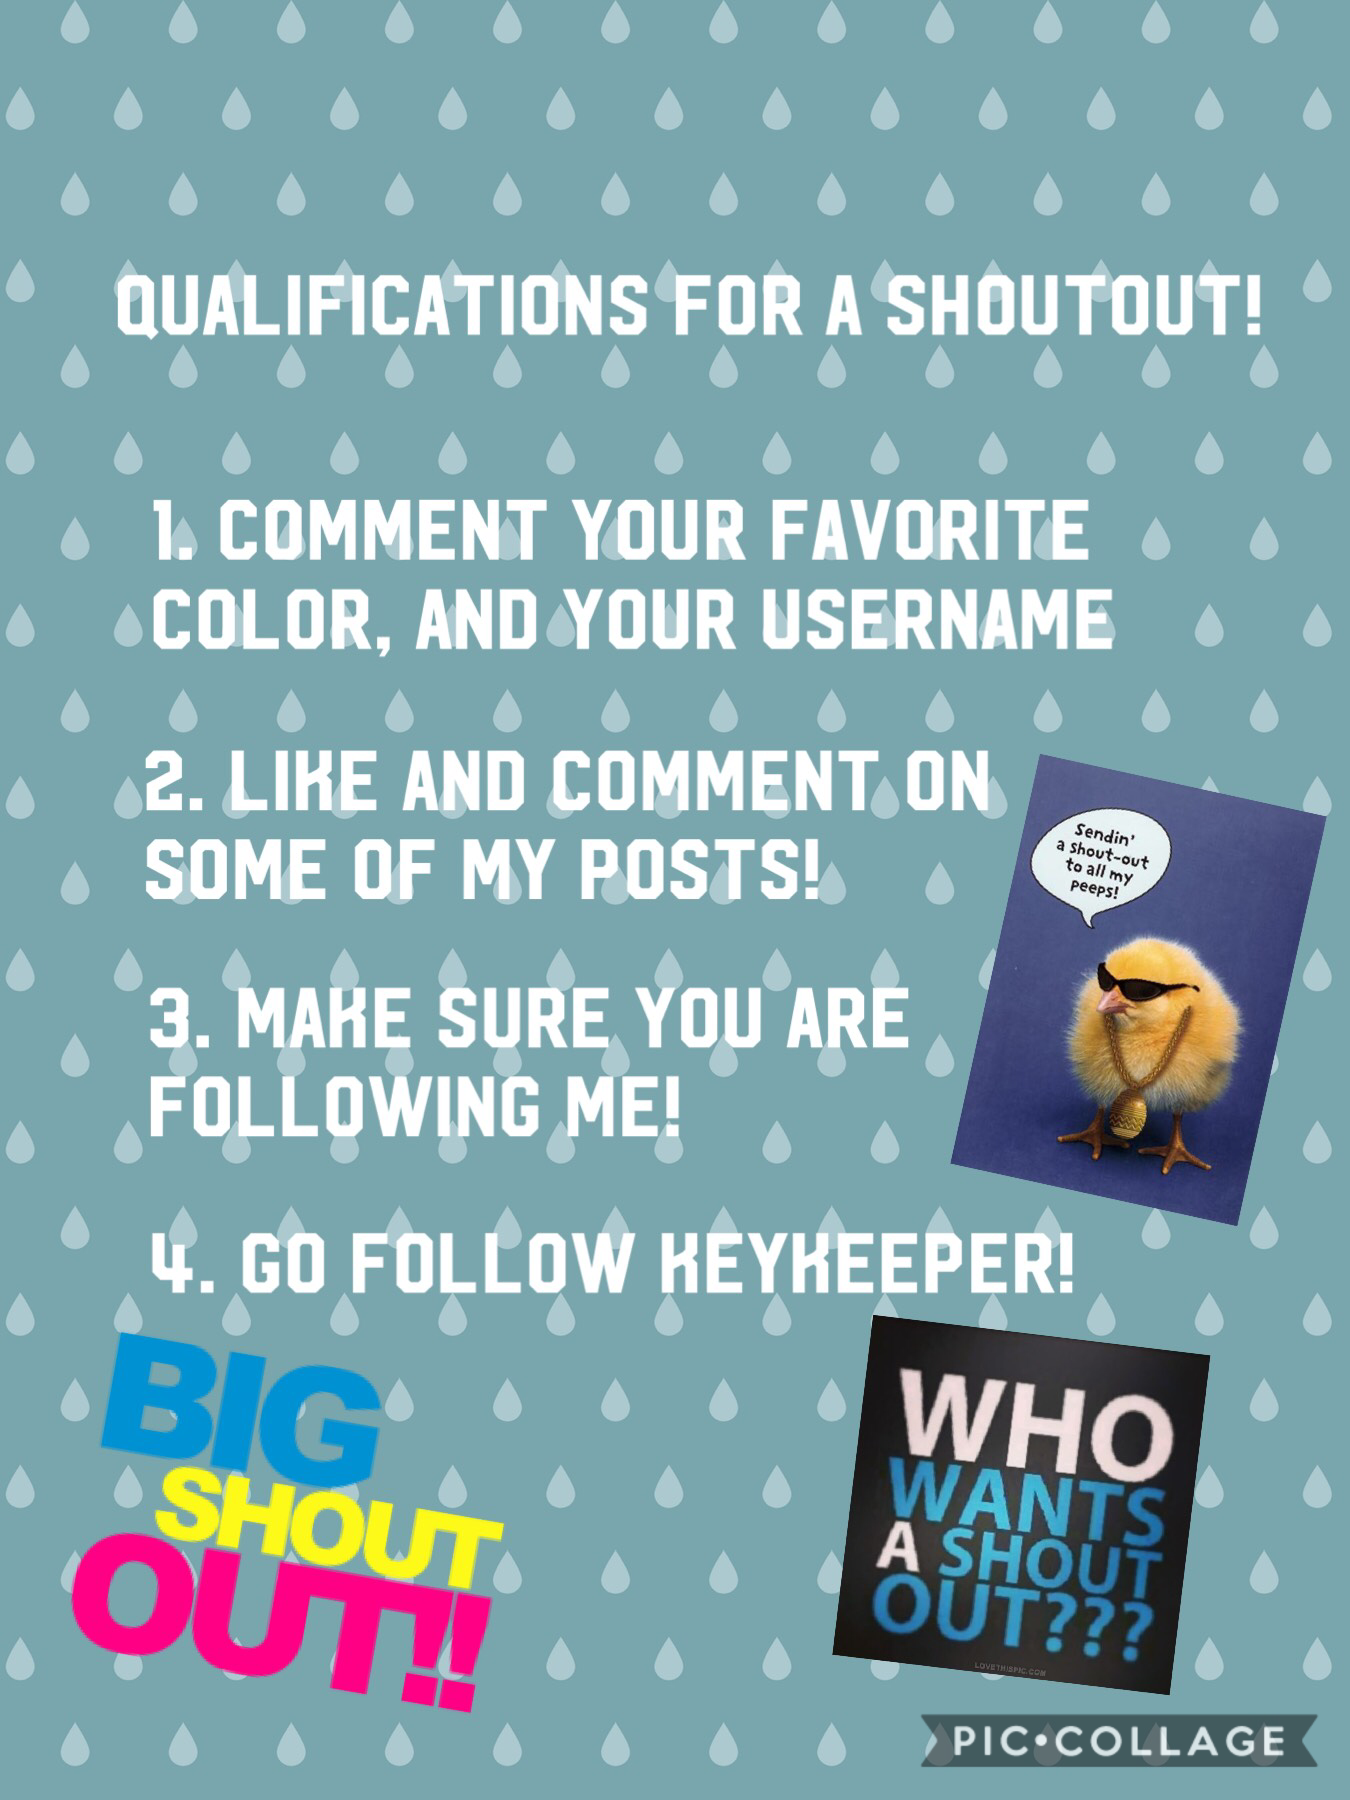 Do the four things for a shout out, make sure to comment that you did them!